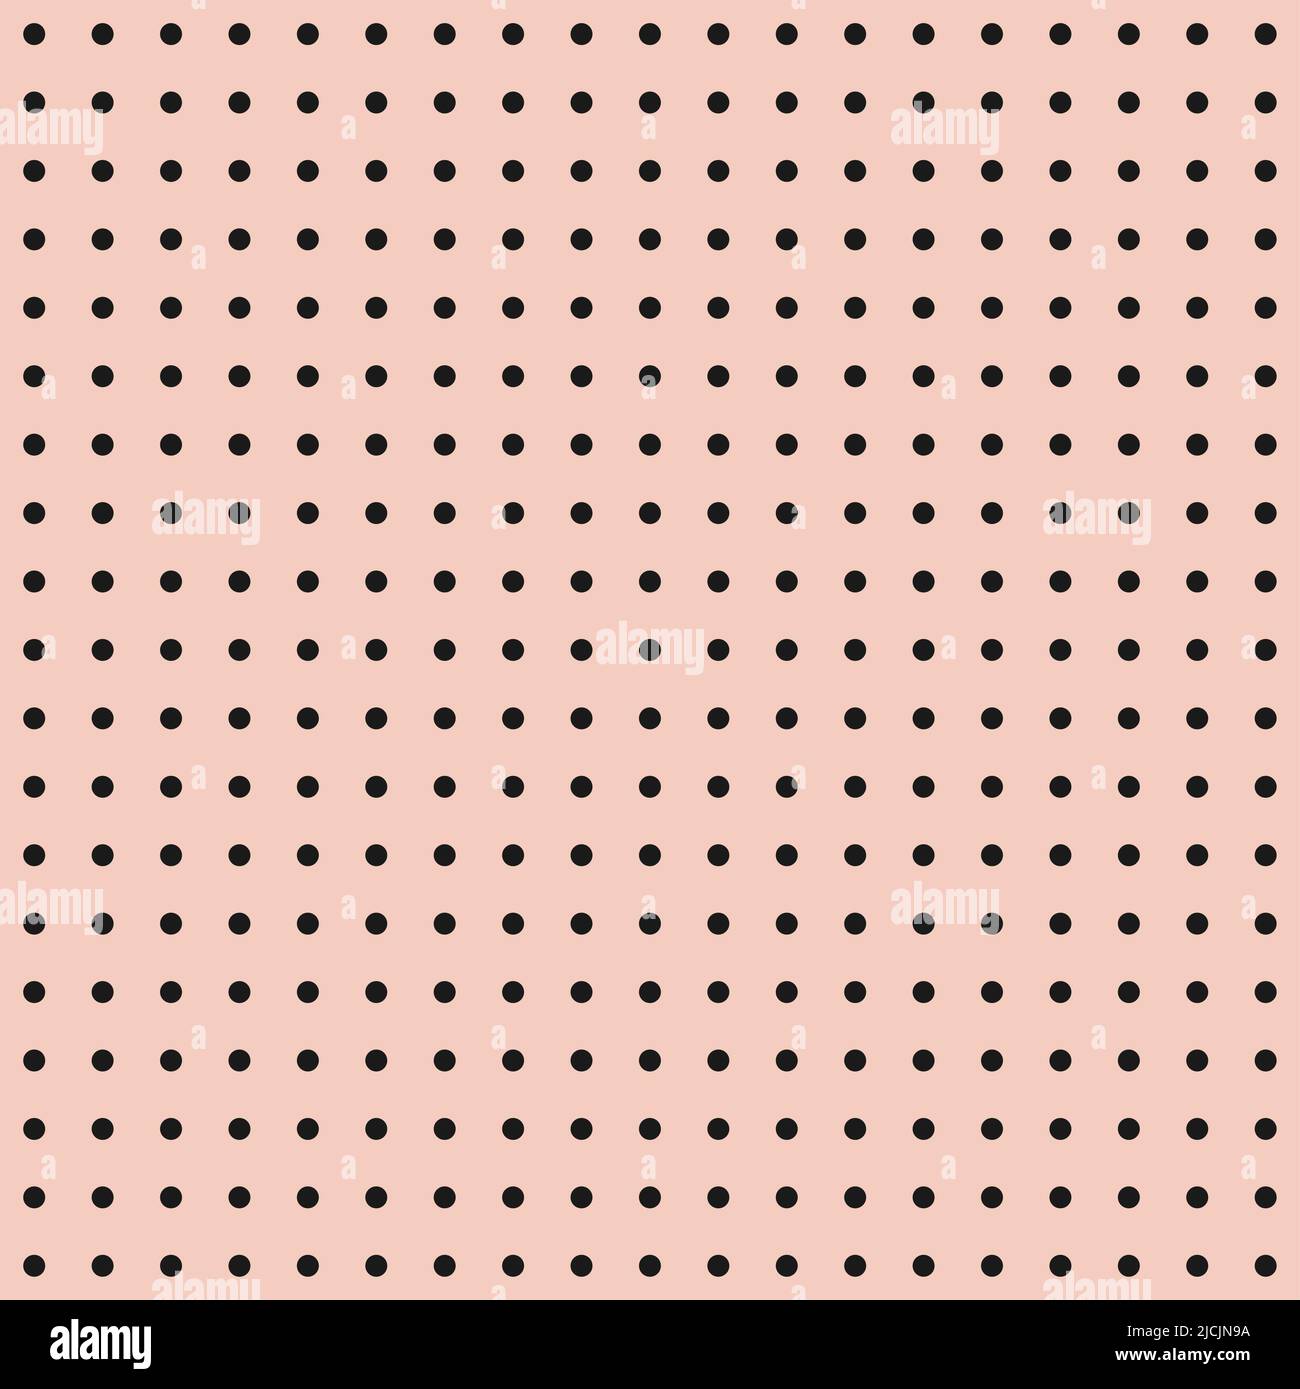 Peg board seamless pattern, pegboard wall grid background, vector realistic texture. Peg board of metal or wood grid, workshop pegboard rack with perforated holes or dotted pattern Stock Vector